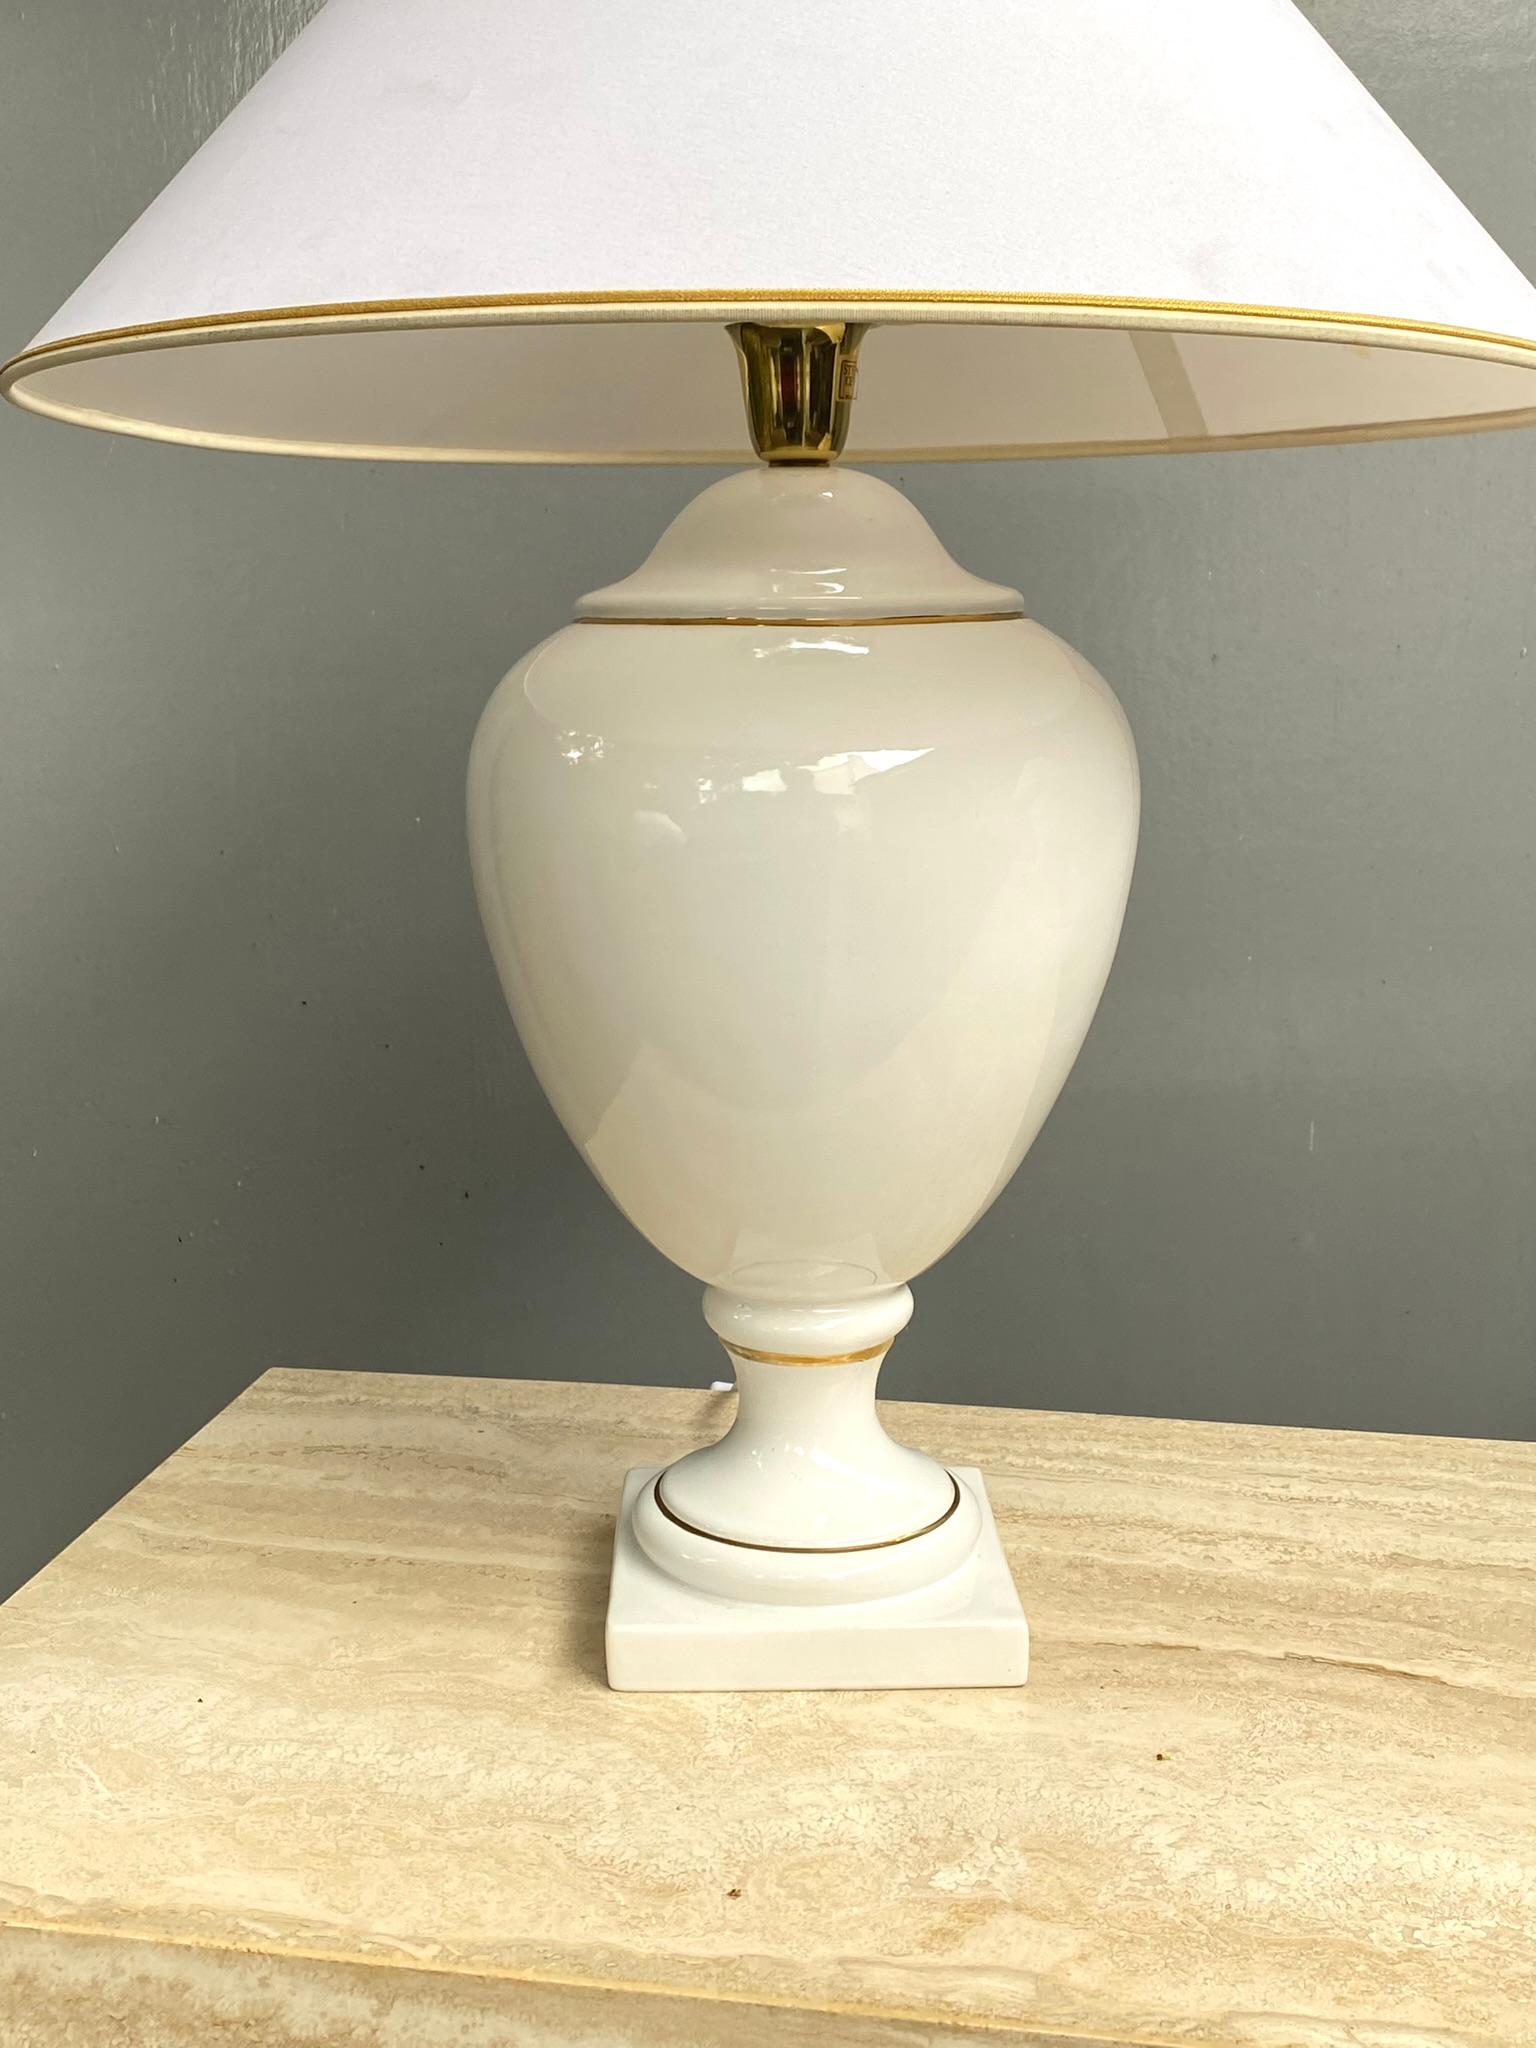 Pair of White & Gold Ceramic Table Lamps & Shades by Stefano Cevoli, 1980s For Sale 8